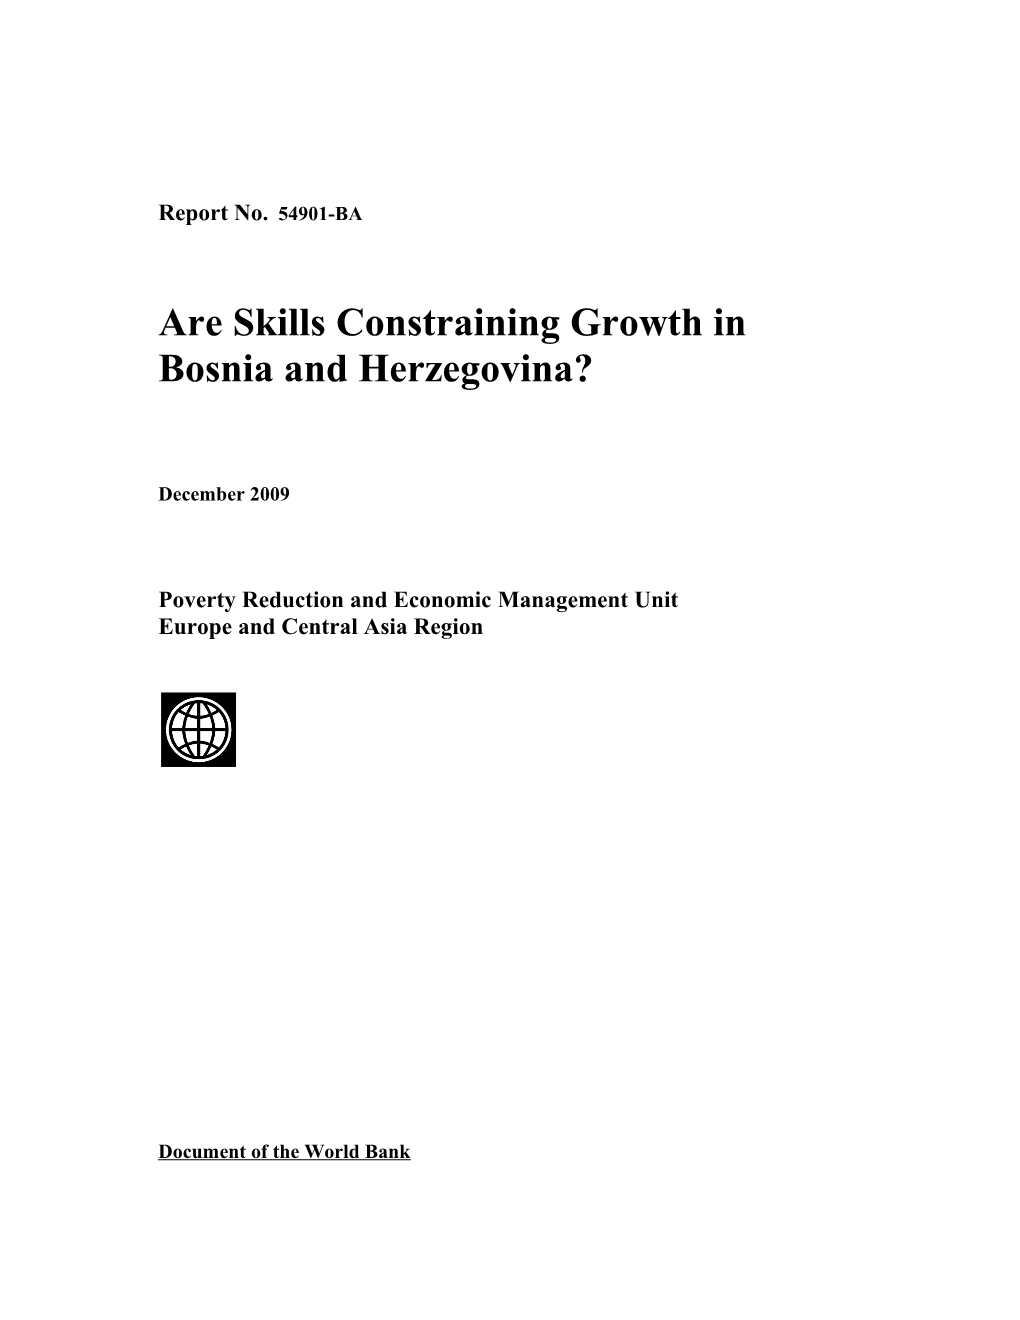 Are Skills Constraining Growth in Bosnia and Herzegovina?